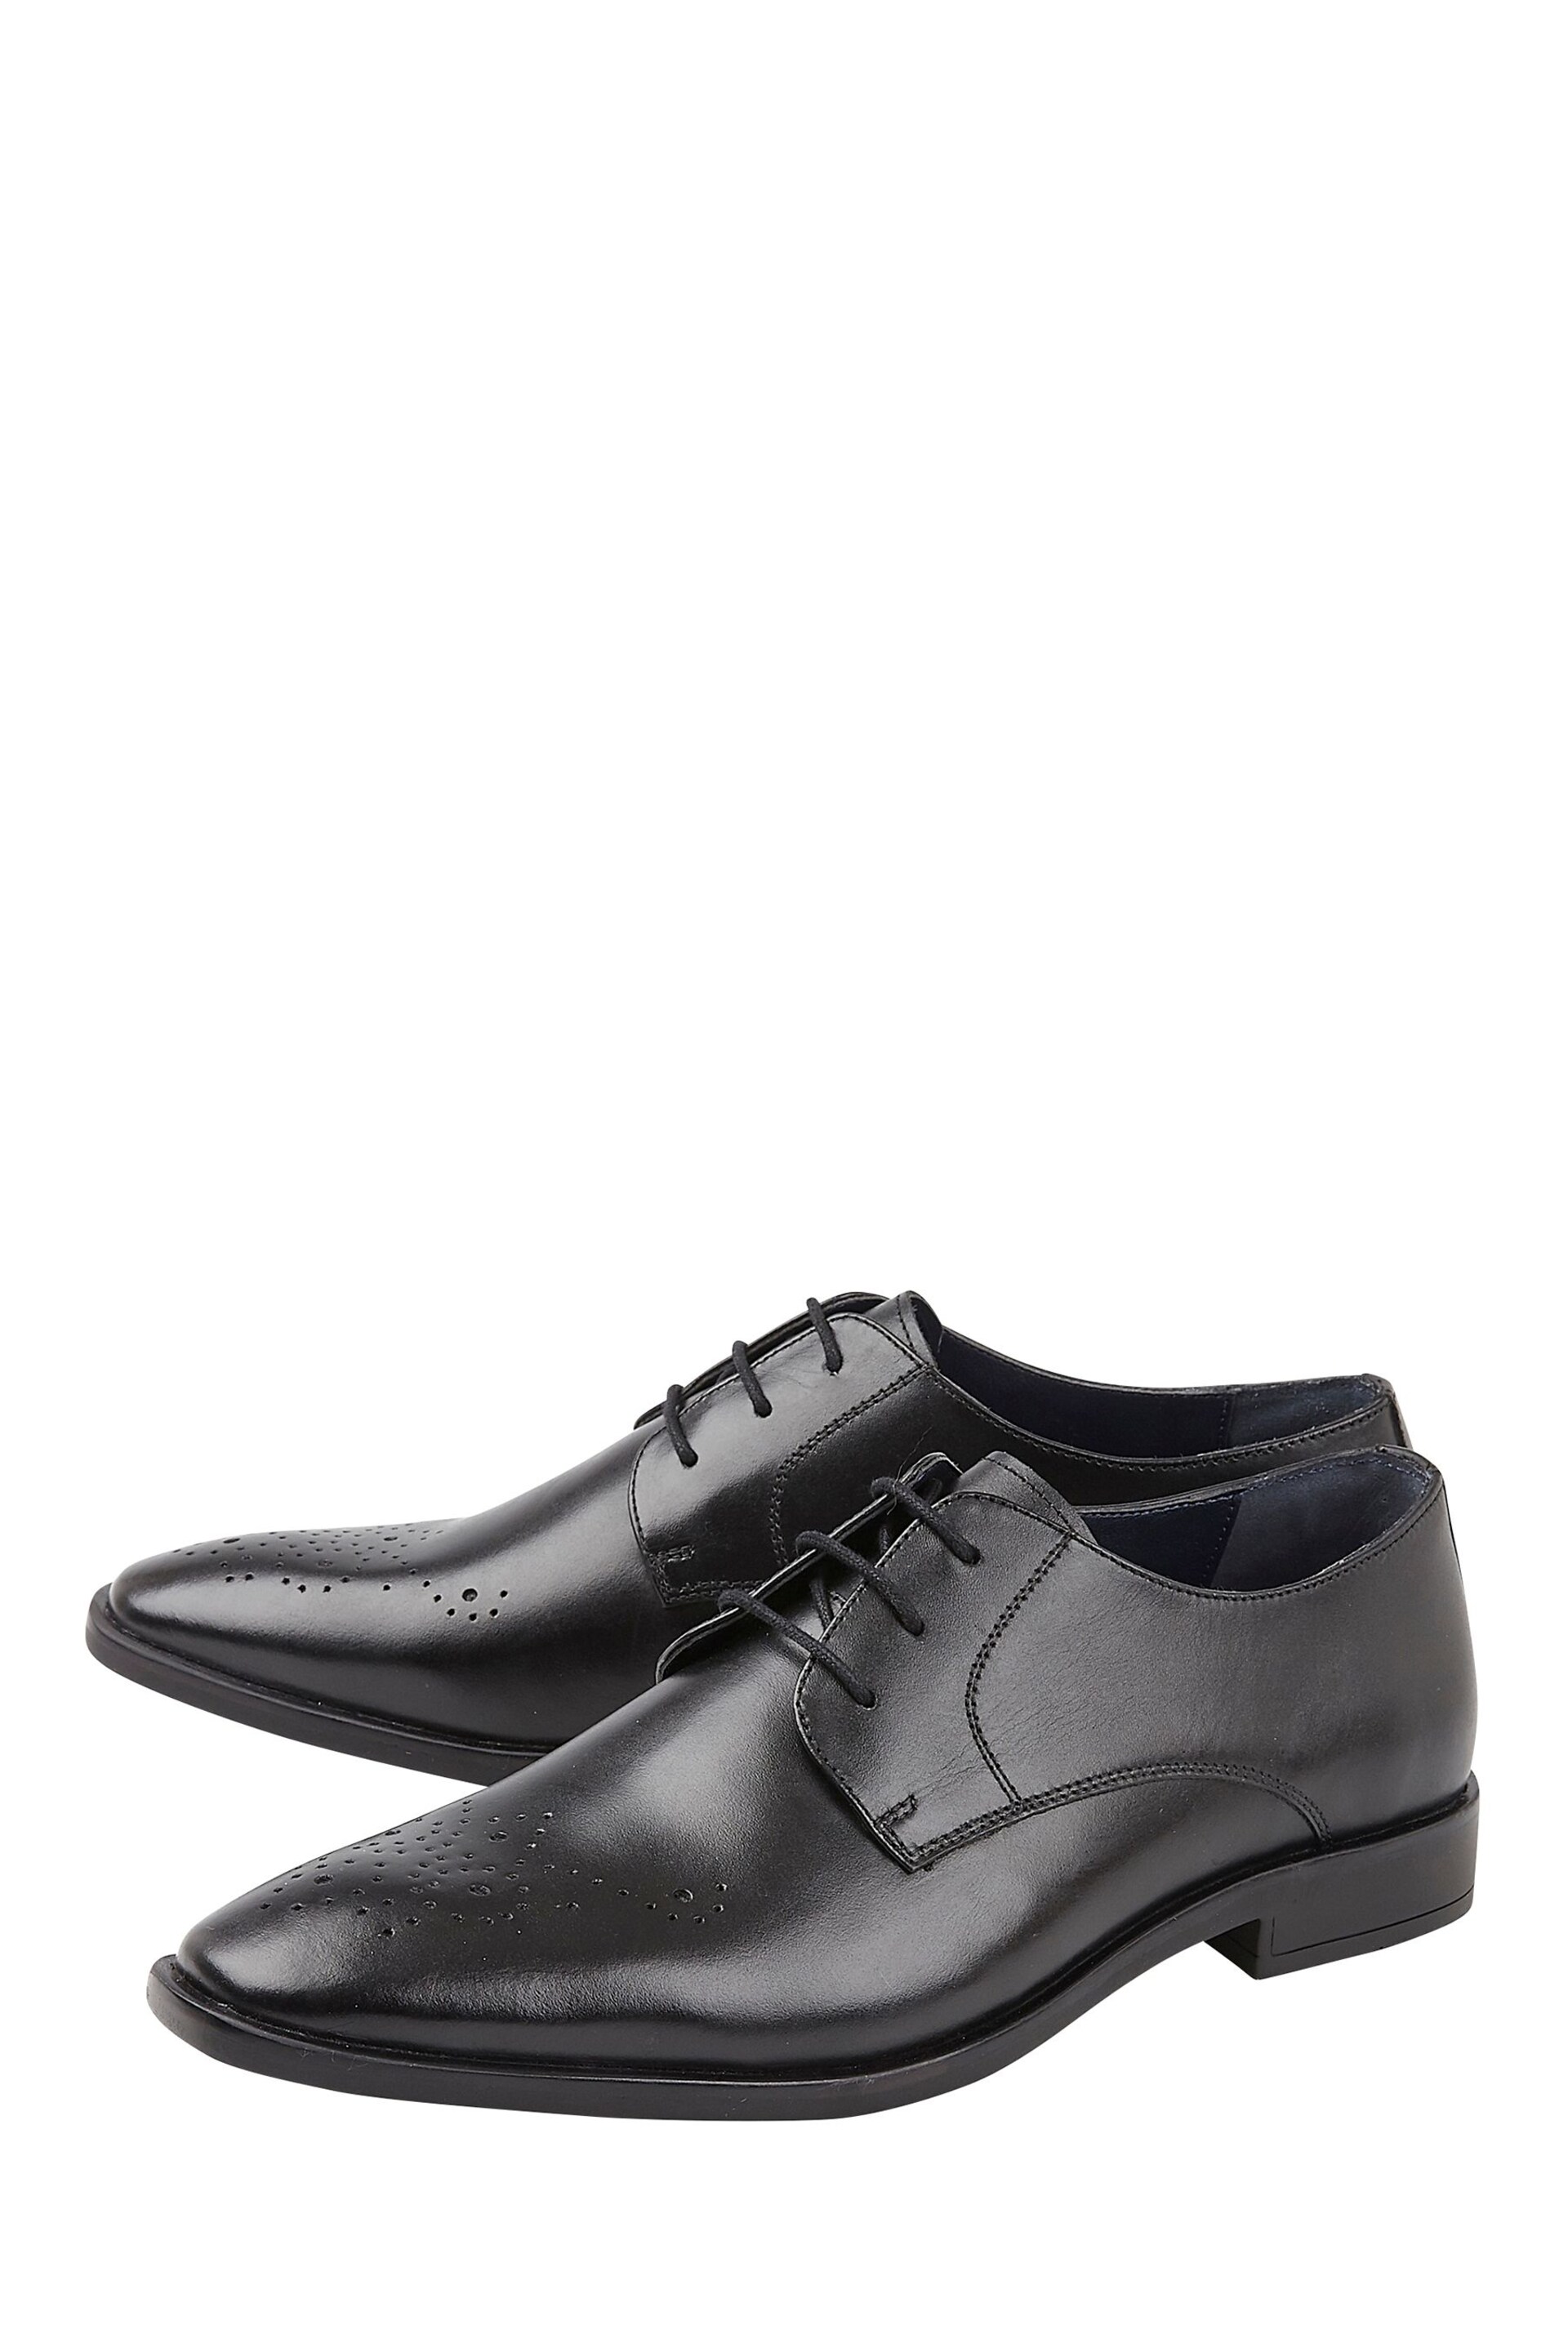 Lotus Black Olive Leather Derby Shoes - Image 2 of 4